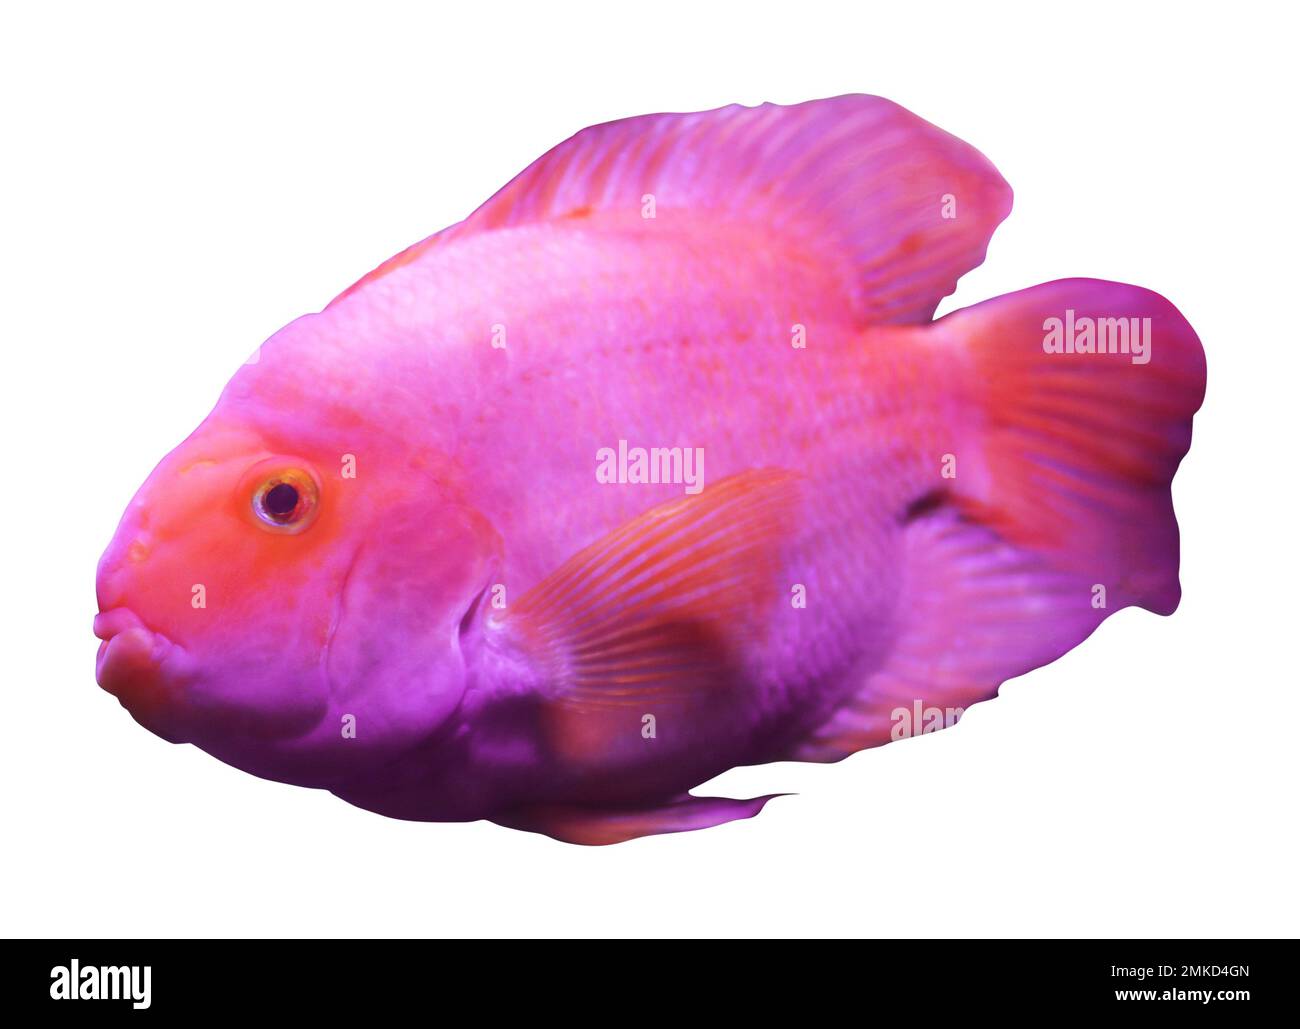 Beautiful blood parrot cichlid fish on white background Stock Photo